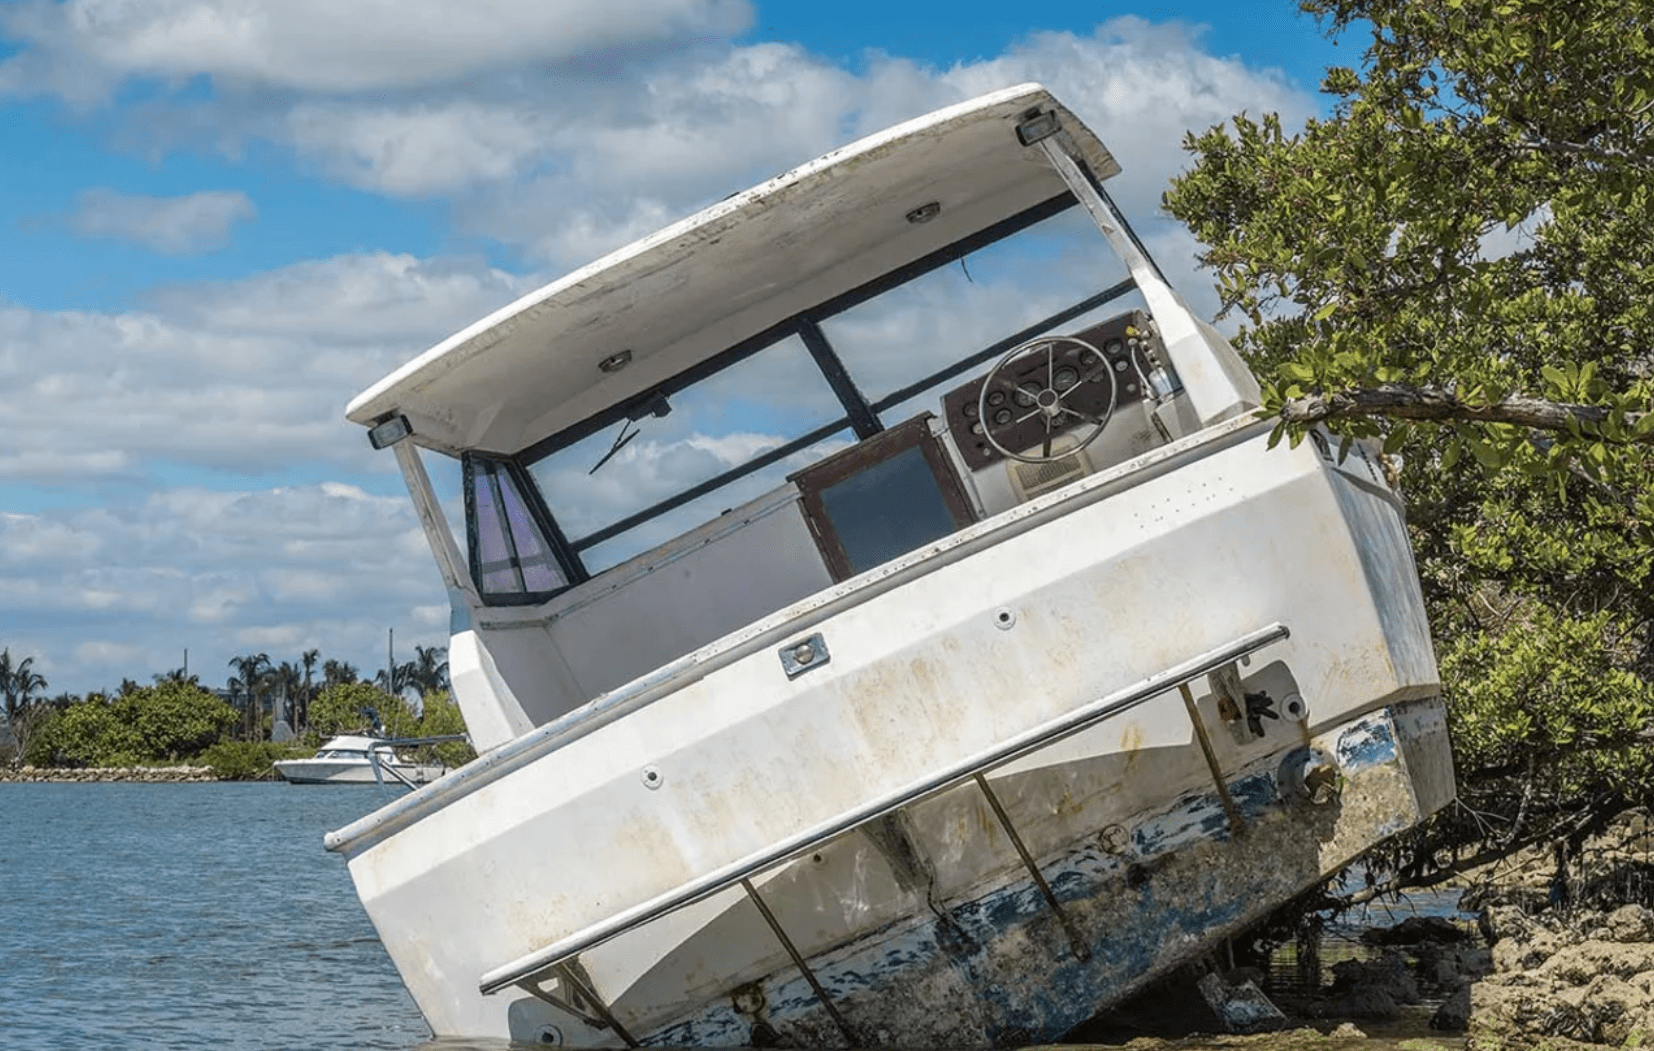 What to Know About Boating Crashes and Maritime Accidents in Texas